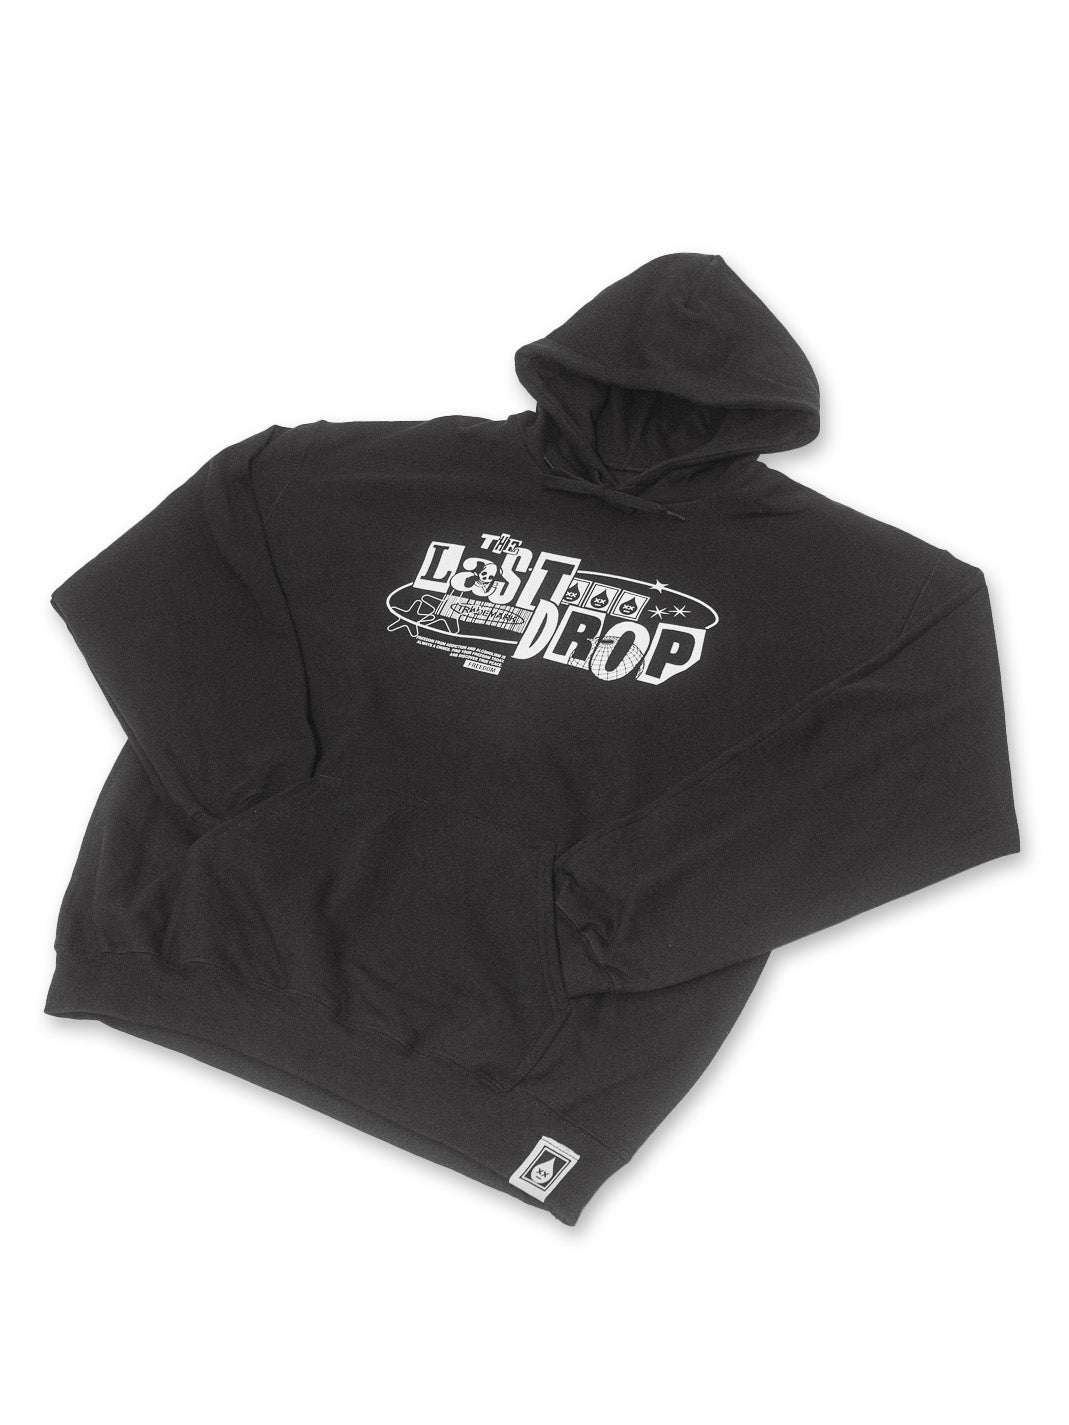 The Trademark Black Y2K Hoodie combines comfort and style with its black fabric and white logo.